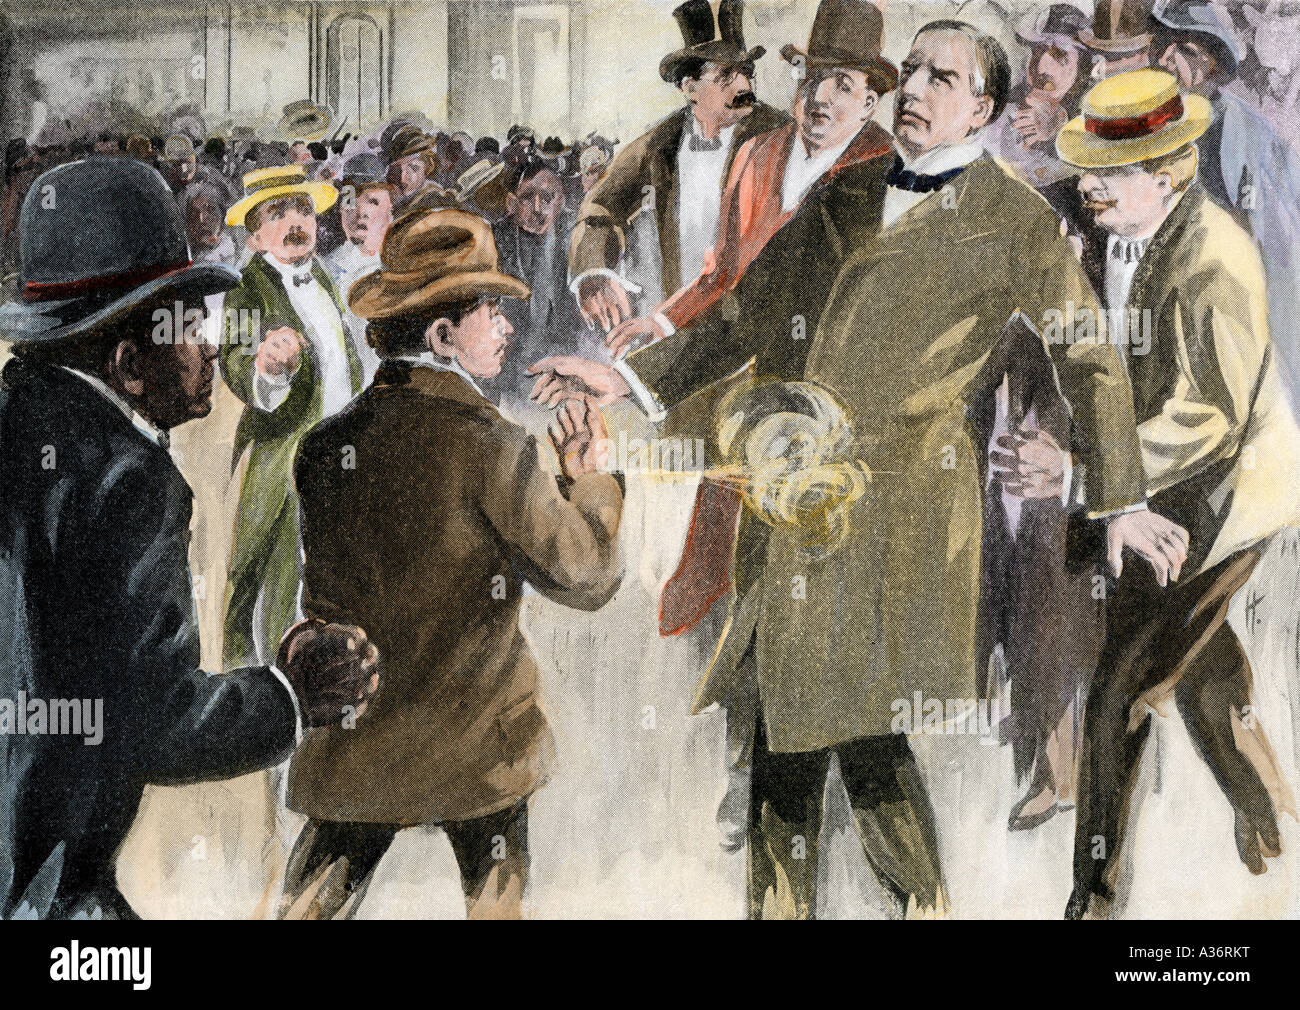 Assassination of President William McKinley by anarchist Leon Czolgosz at Buffalo New York in 1901. Hand-colored halftone of an illustration Stock Photo